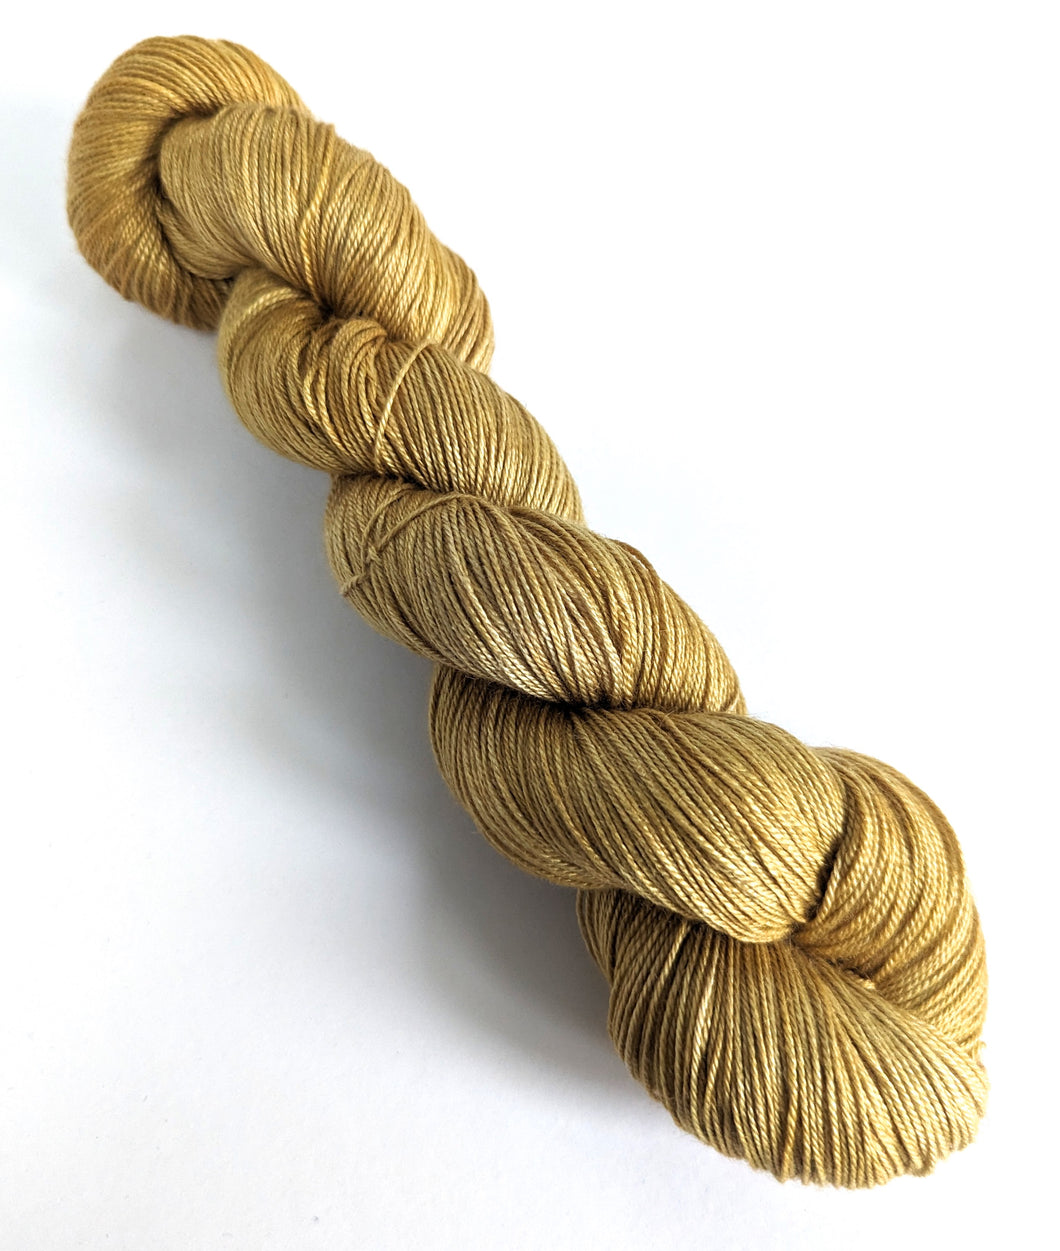 Gold, on baby camel/silk 4ply/fingering weight yarn.